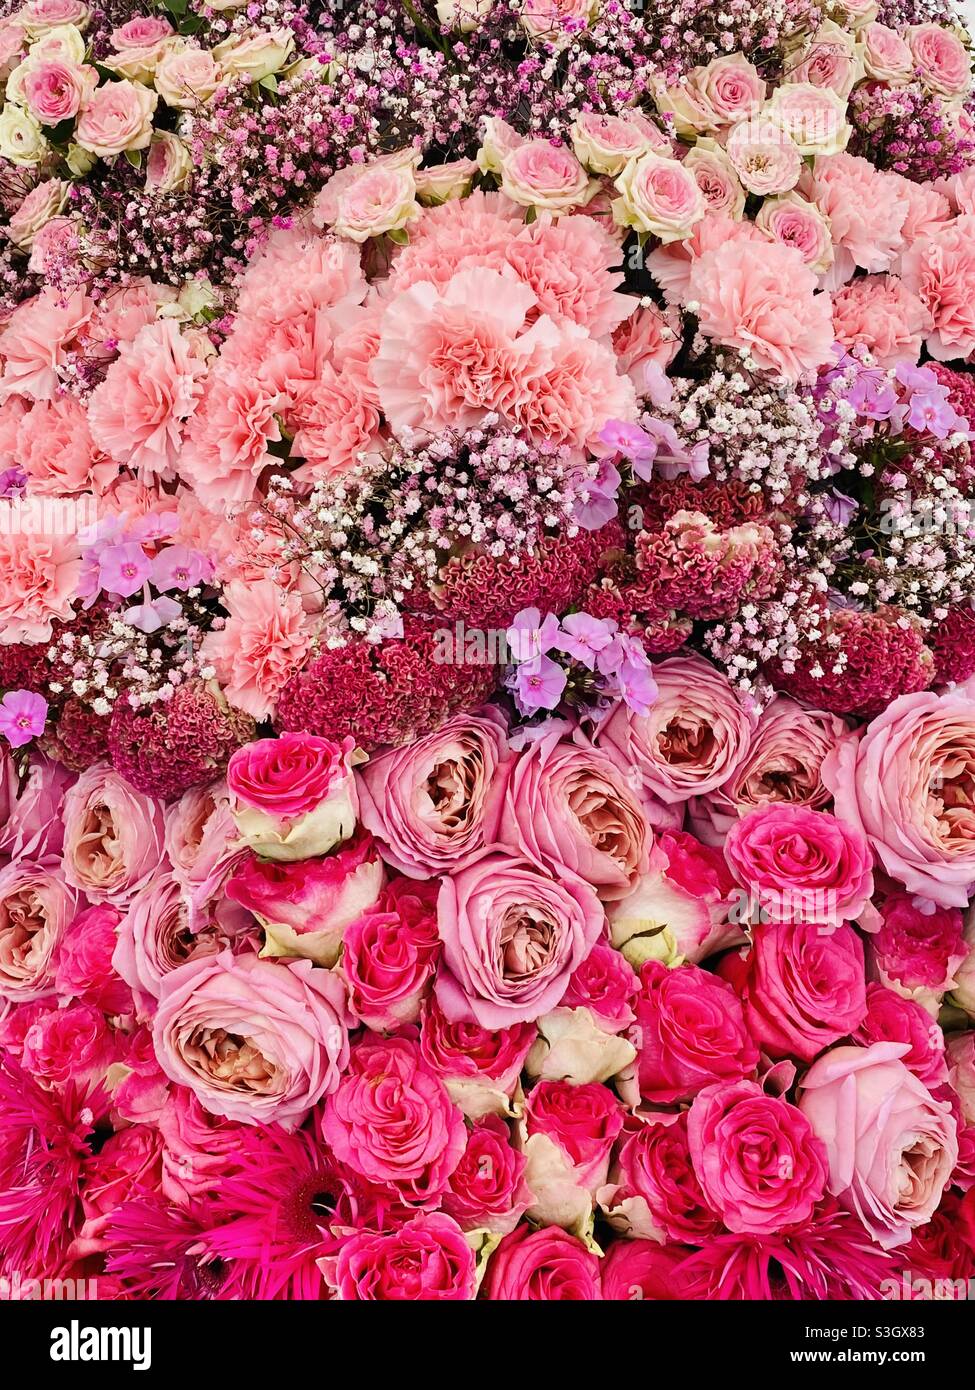 A riot of pink roses ? at the RHS Tattenhall Flower Show Stock Photo